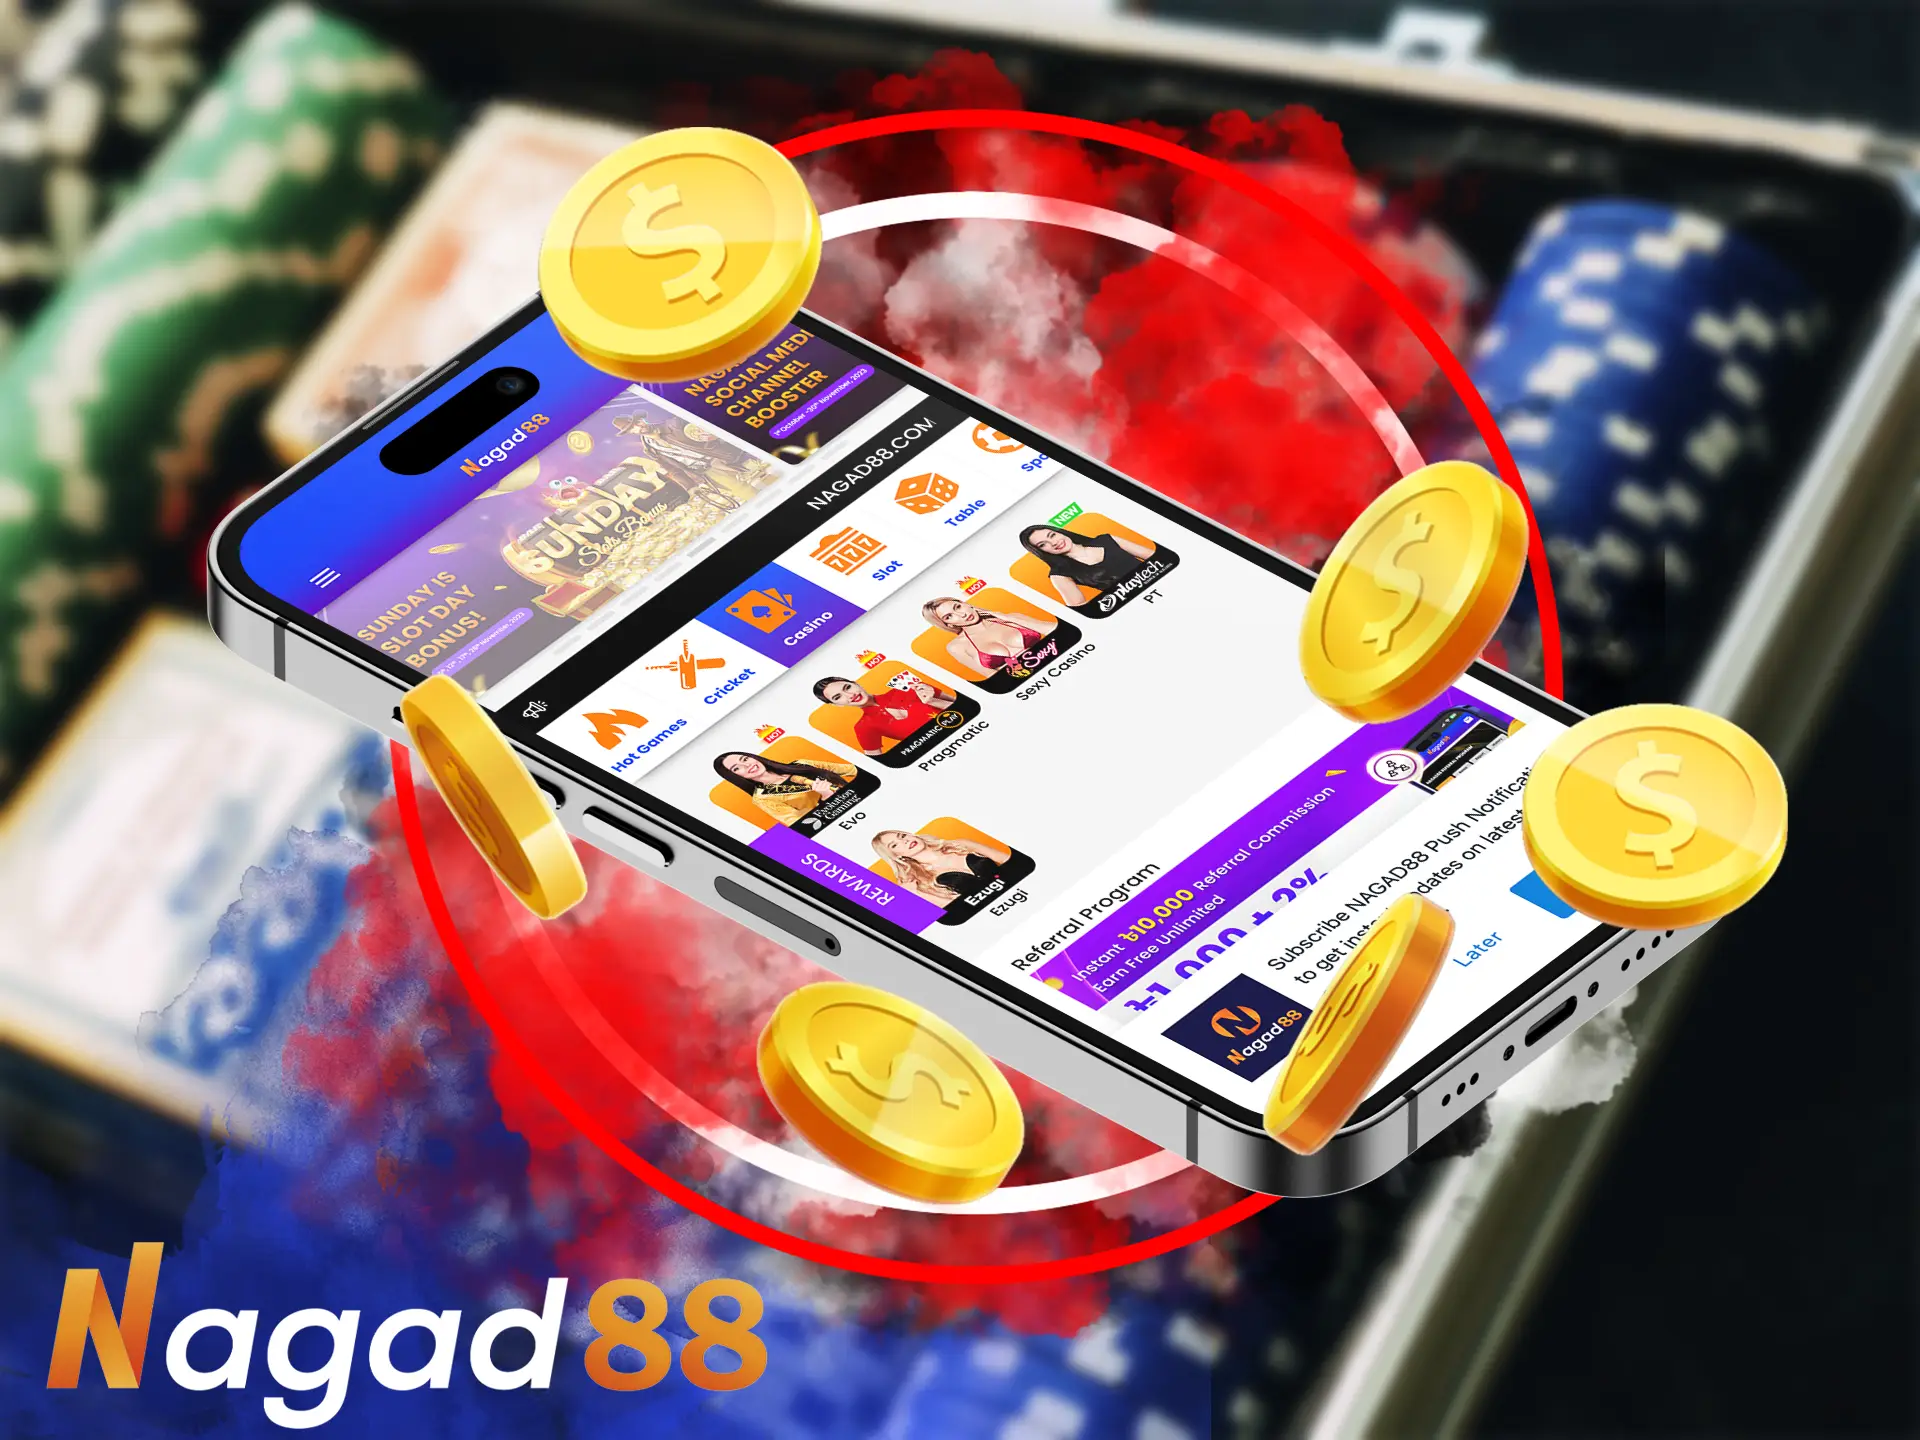 Get access to the gambling section after installing the Nagad88 software on your smartphone.